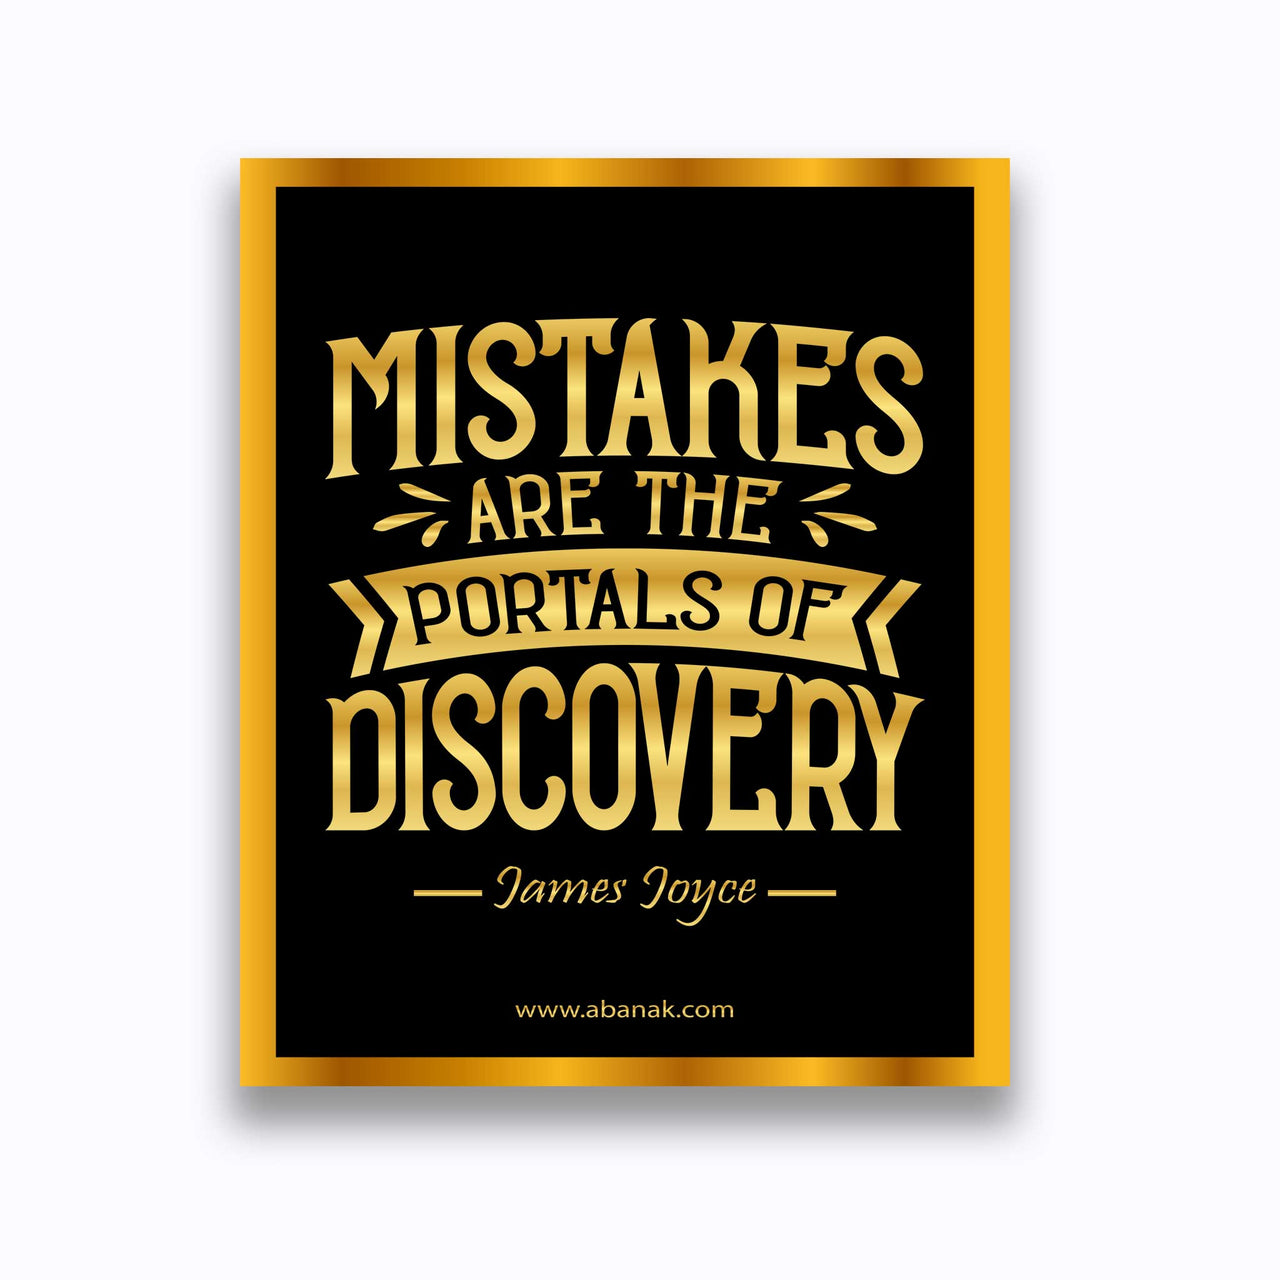 Portals of Discovery - James Joyce Quote - Canvas Print